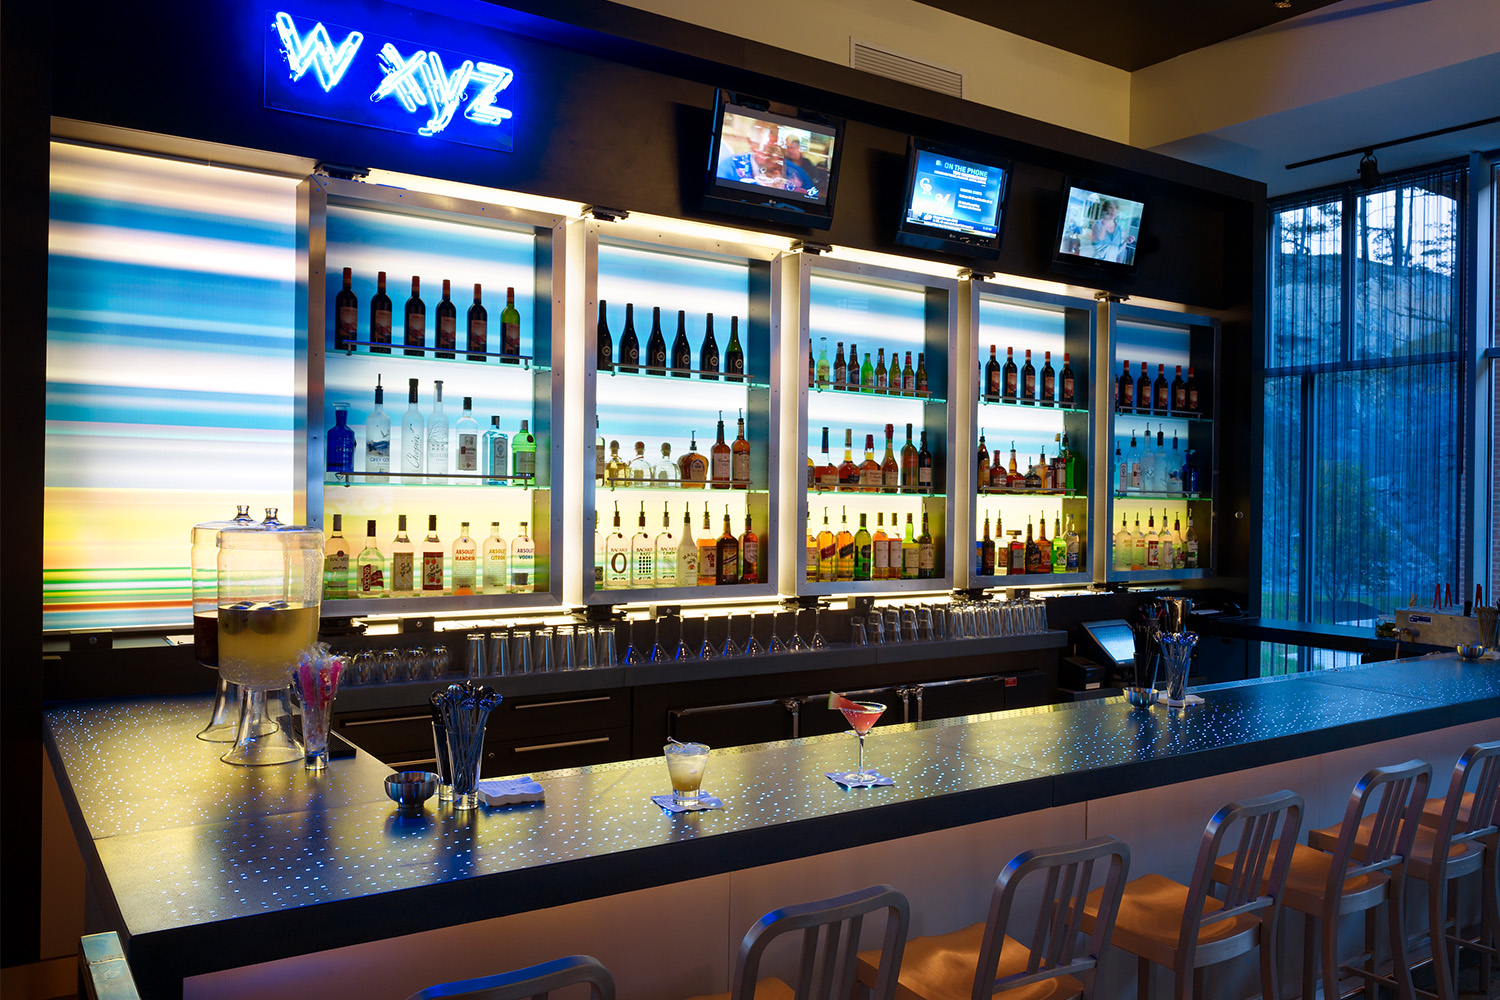 W XYZ bar featured in Aloft building: upscale bar area with LED lighting 